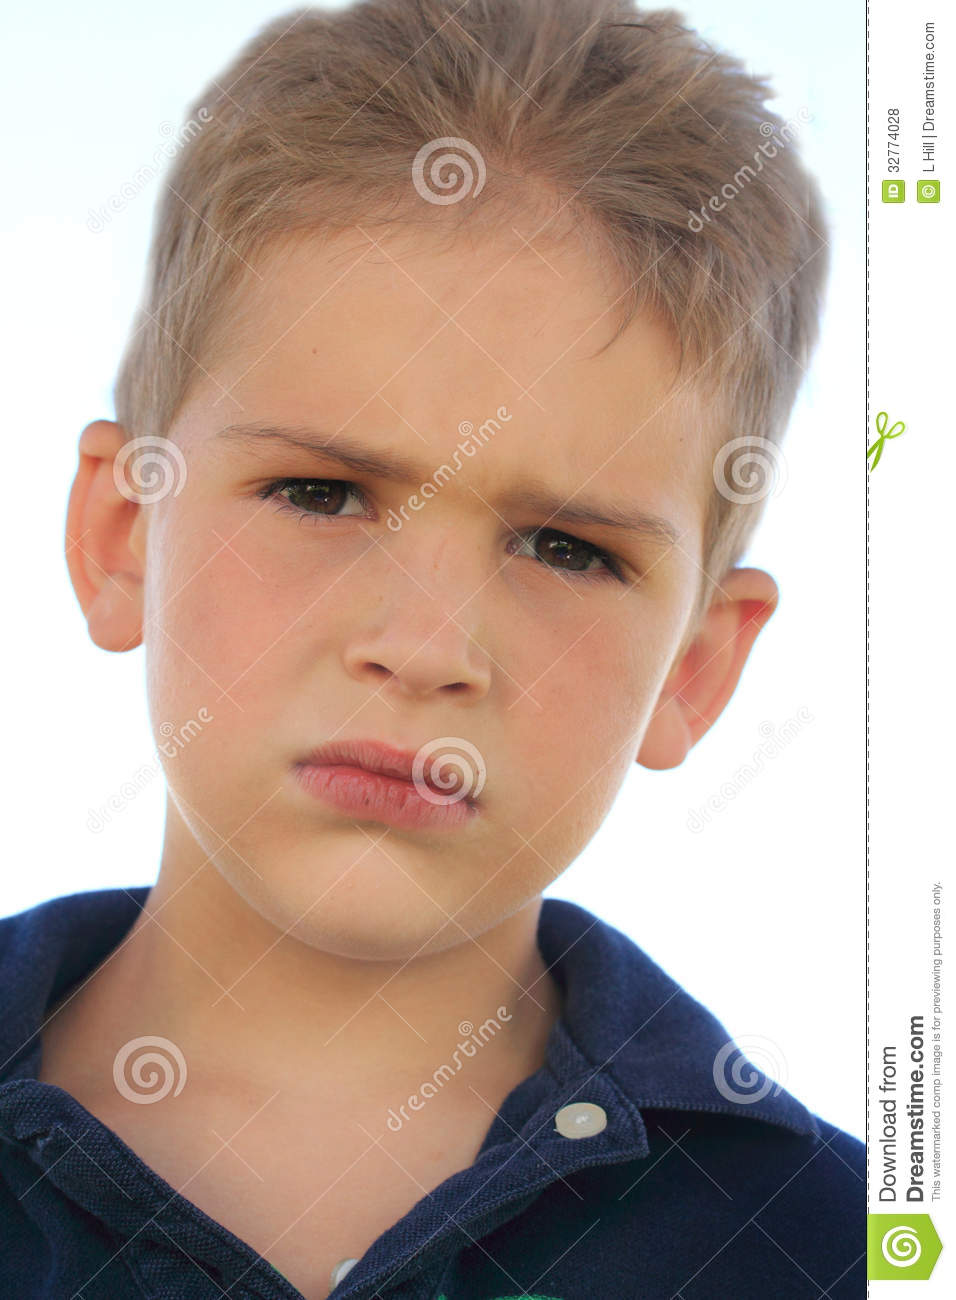 Closeup Of A Cute Little Blond Boy With Grumpy Serious Expression